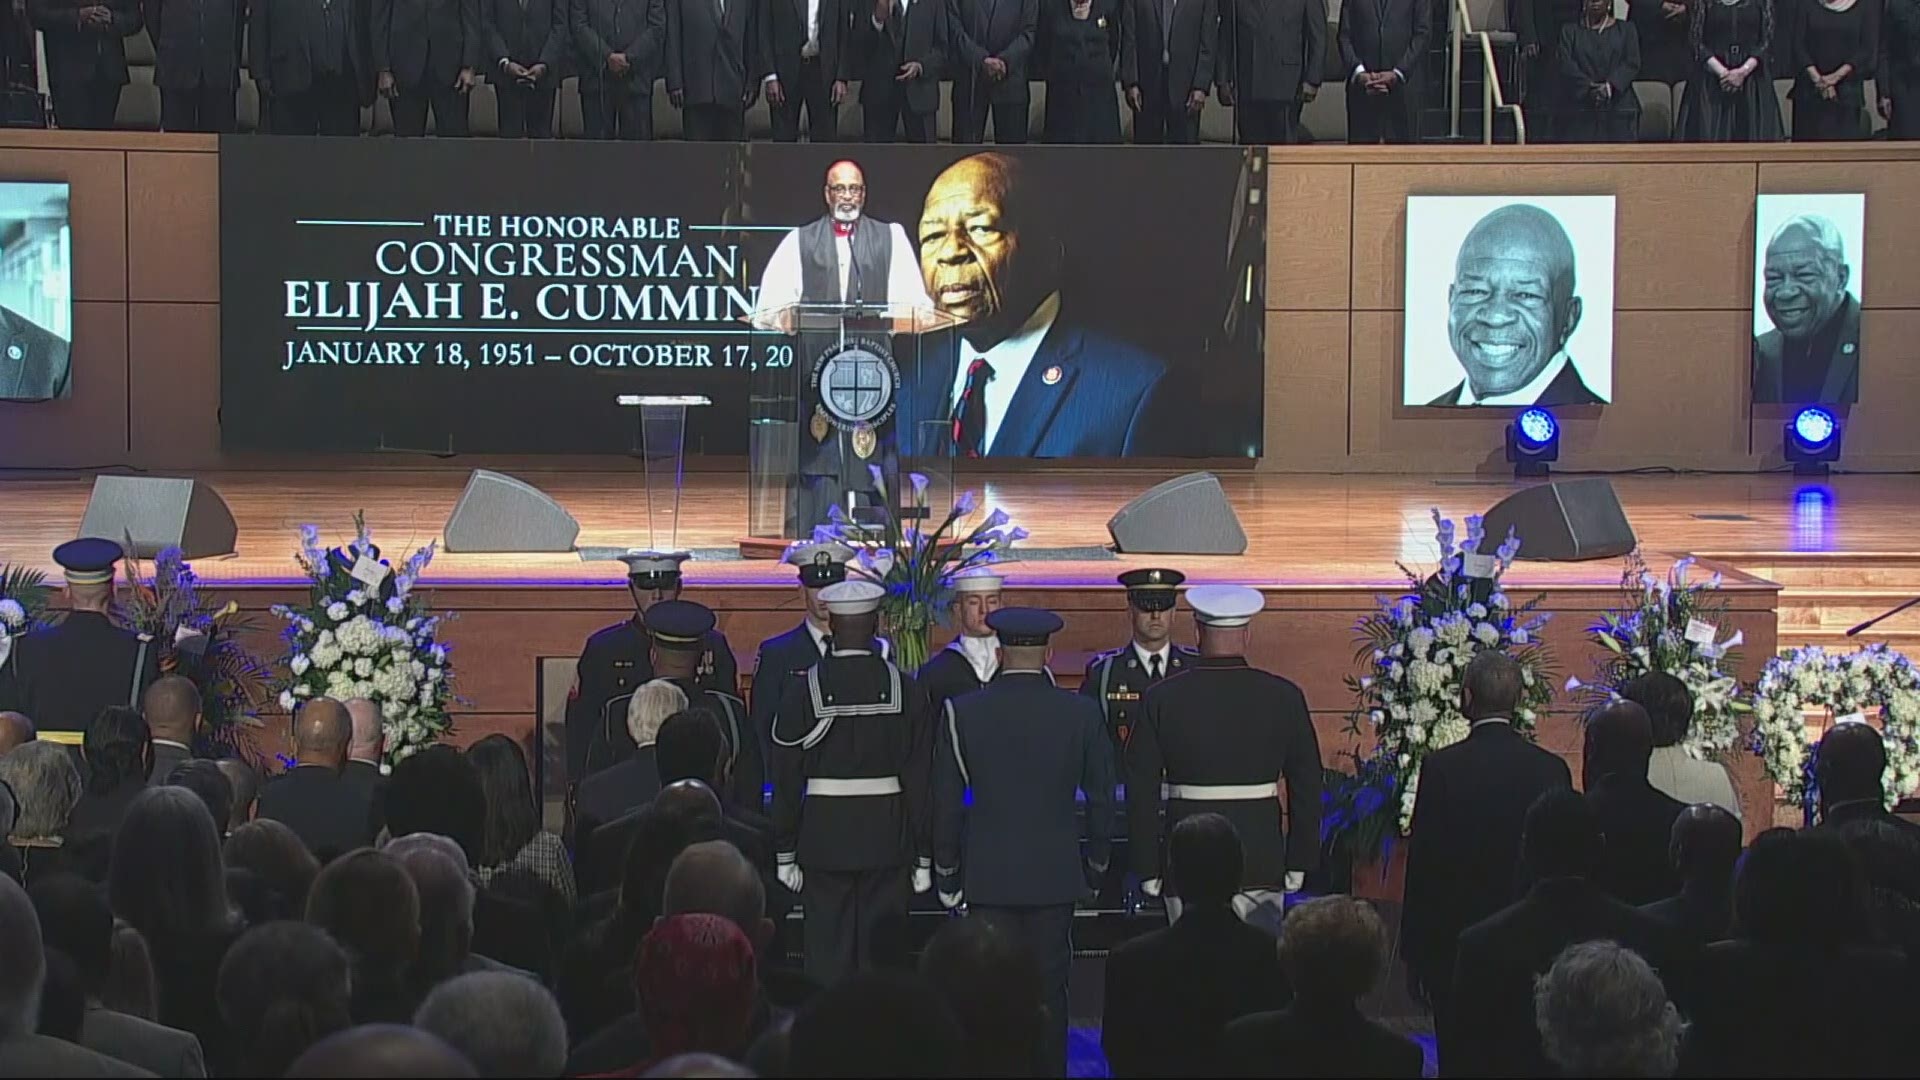 Congressman and civil rights leader Elijah Cummings was remembered Friday as a "fierce champion of truth, justice and kindness" at a funeral that brought Washington